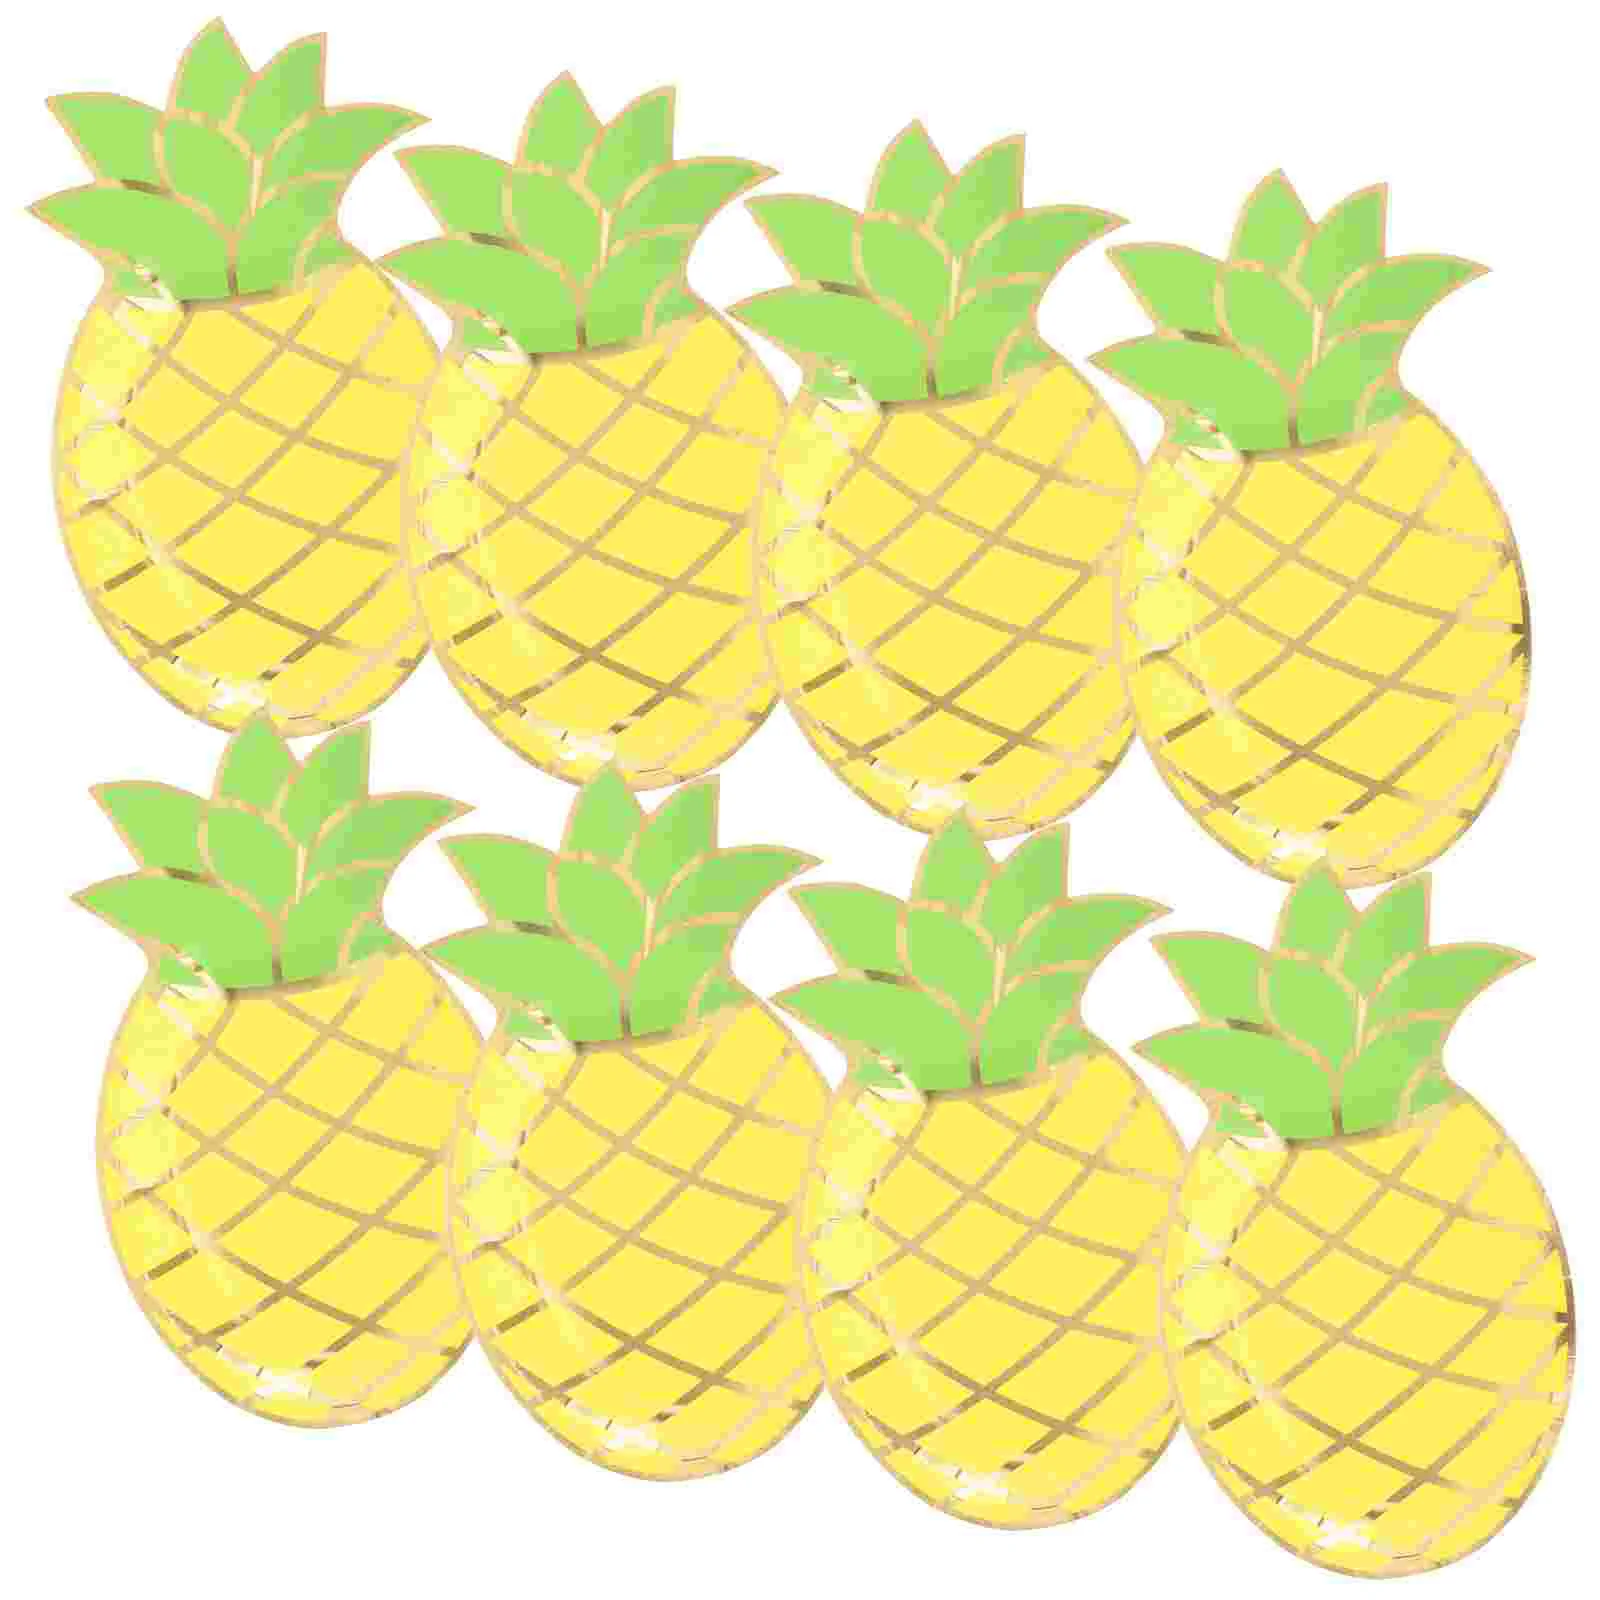 

Plates Plate Party Pineapple Disposable Trays Dessert Serving Paper Tropical Luau Tray Dinner Cookie Summer Supplies Decorations